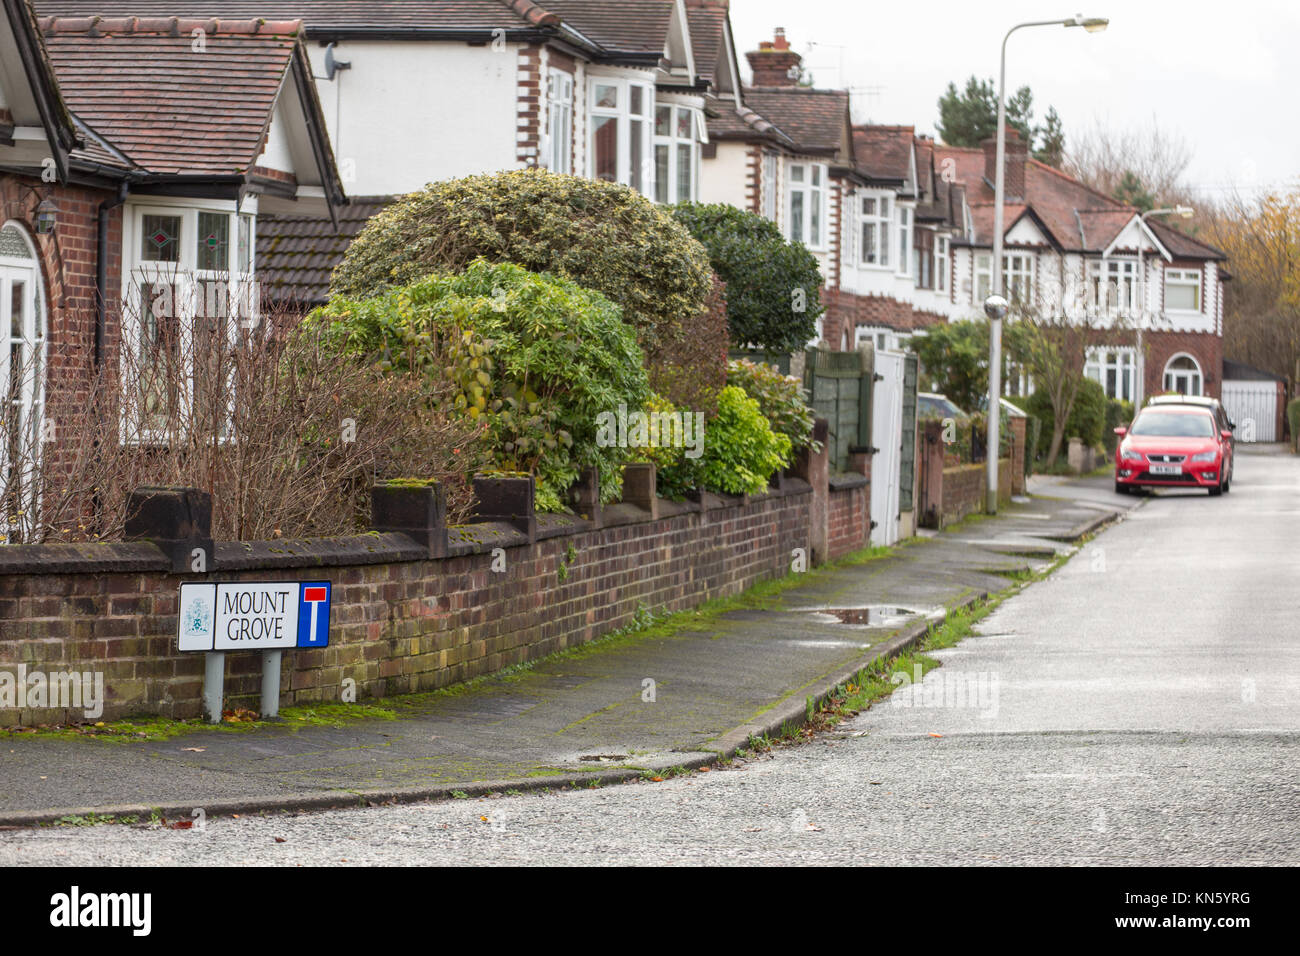 Mont Grove Street sign in Gatley, Greater Manchester, Angleterre, RU prise le 25-Nov-2017 Banque D'Images